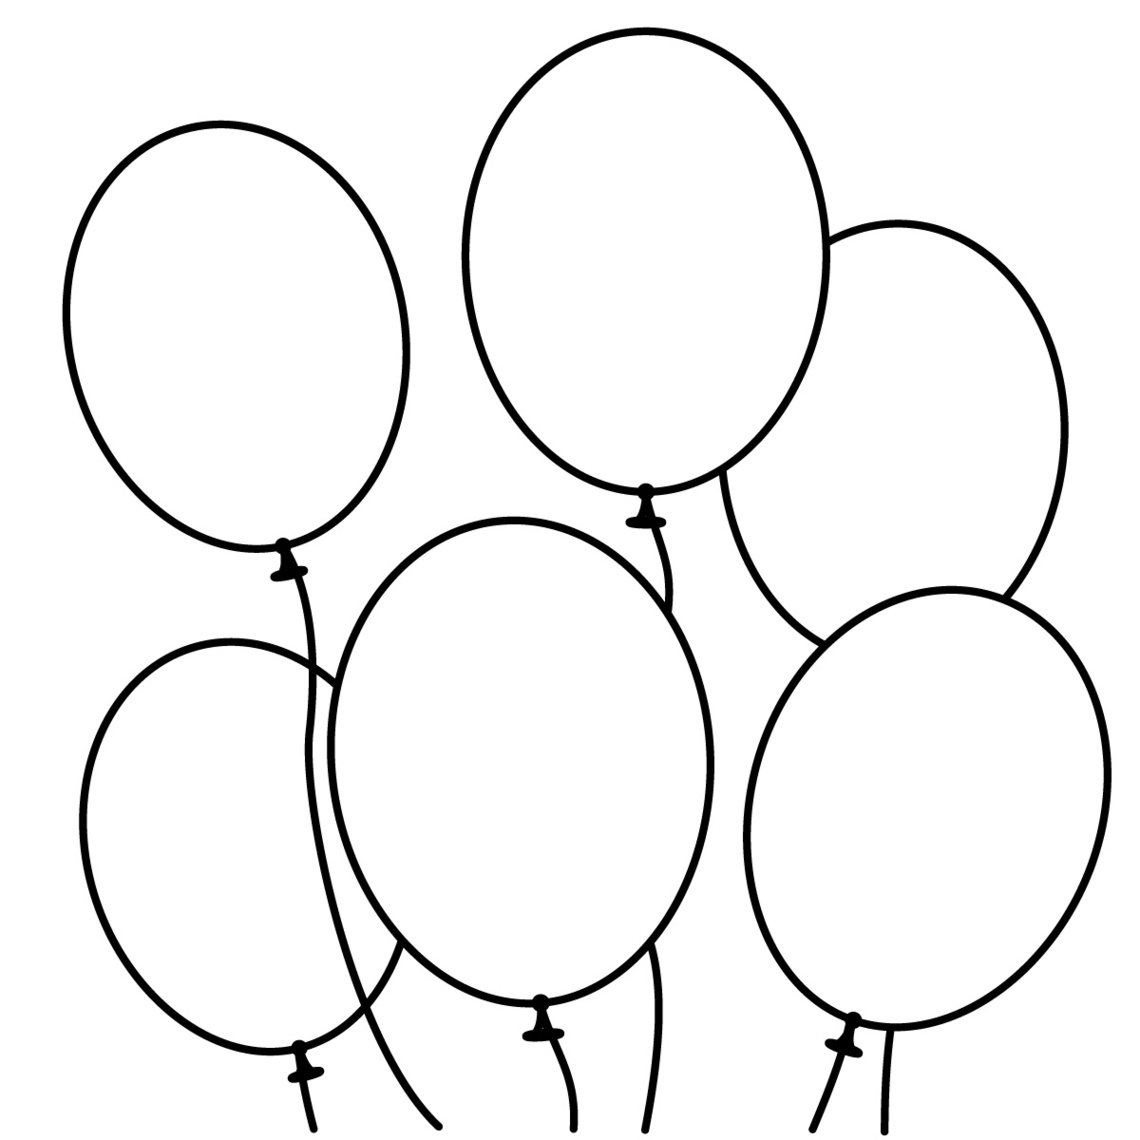 Free Balloon Clipart Black And White, Download Free Balloon Clipart